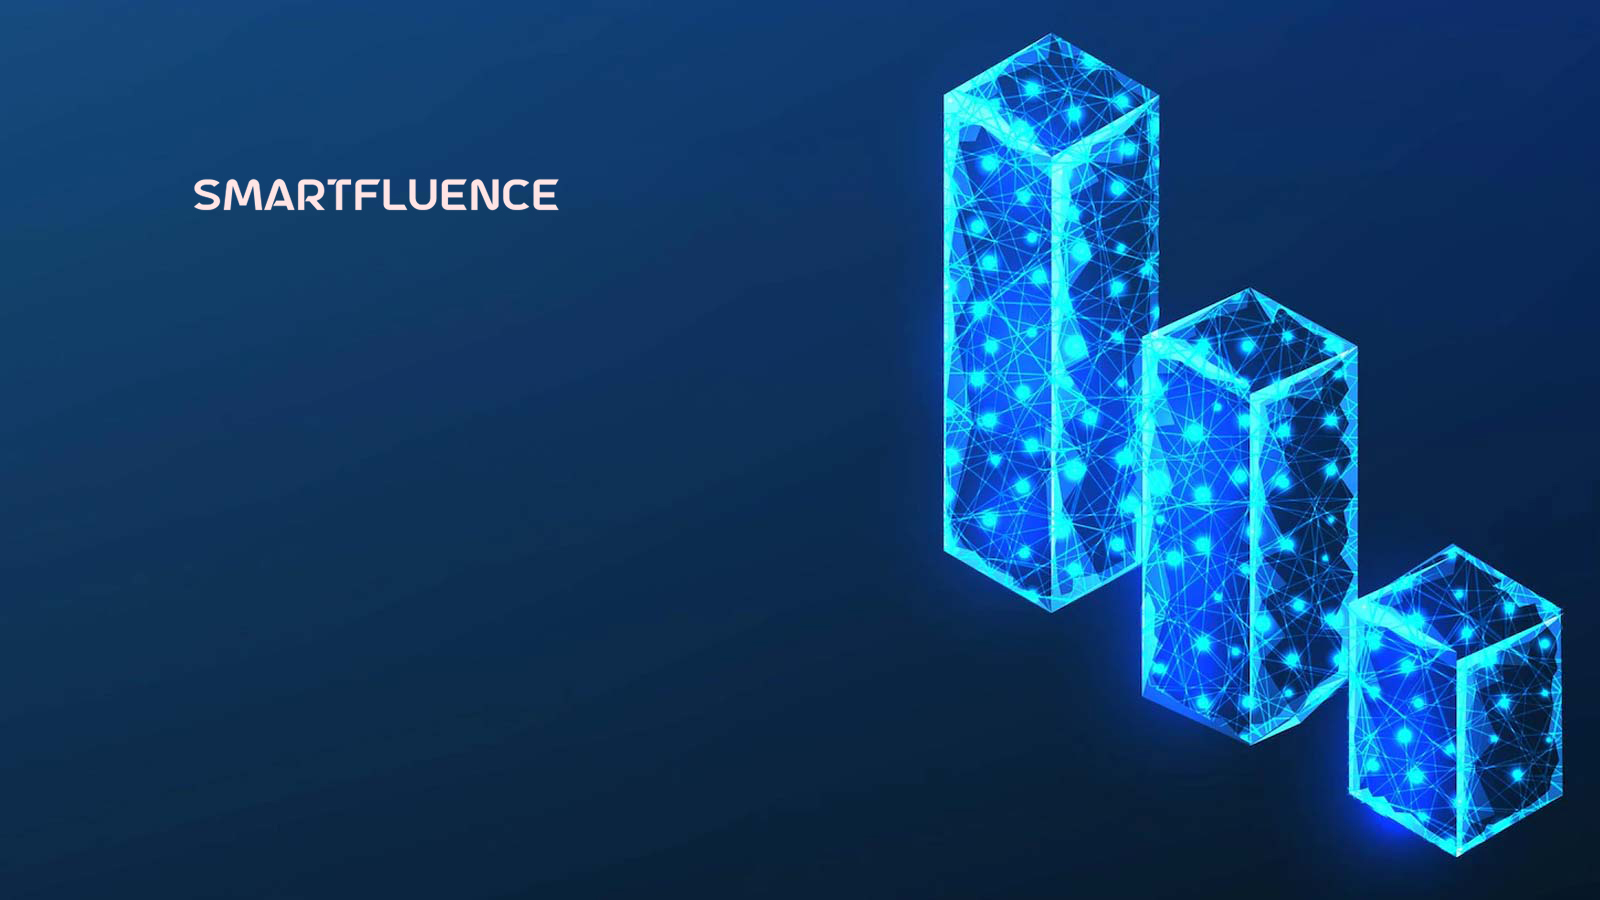 Smartfluence, the Fastest Growing SaaS Influencer Marketing Platform, Closes $2.15 Million Seed Round Led by PACA Ventures